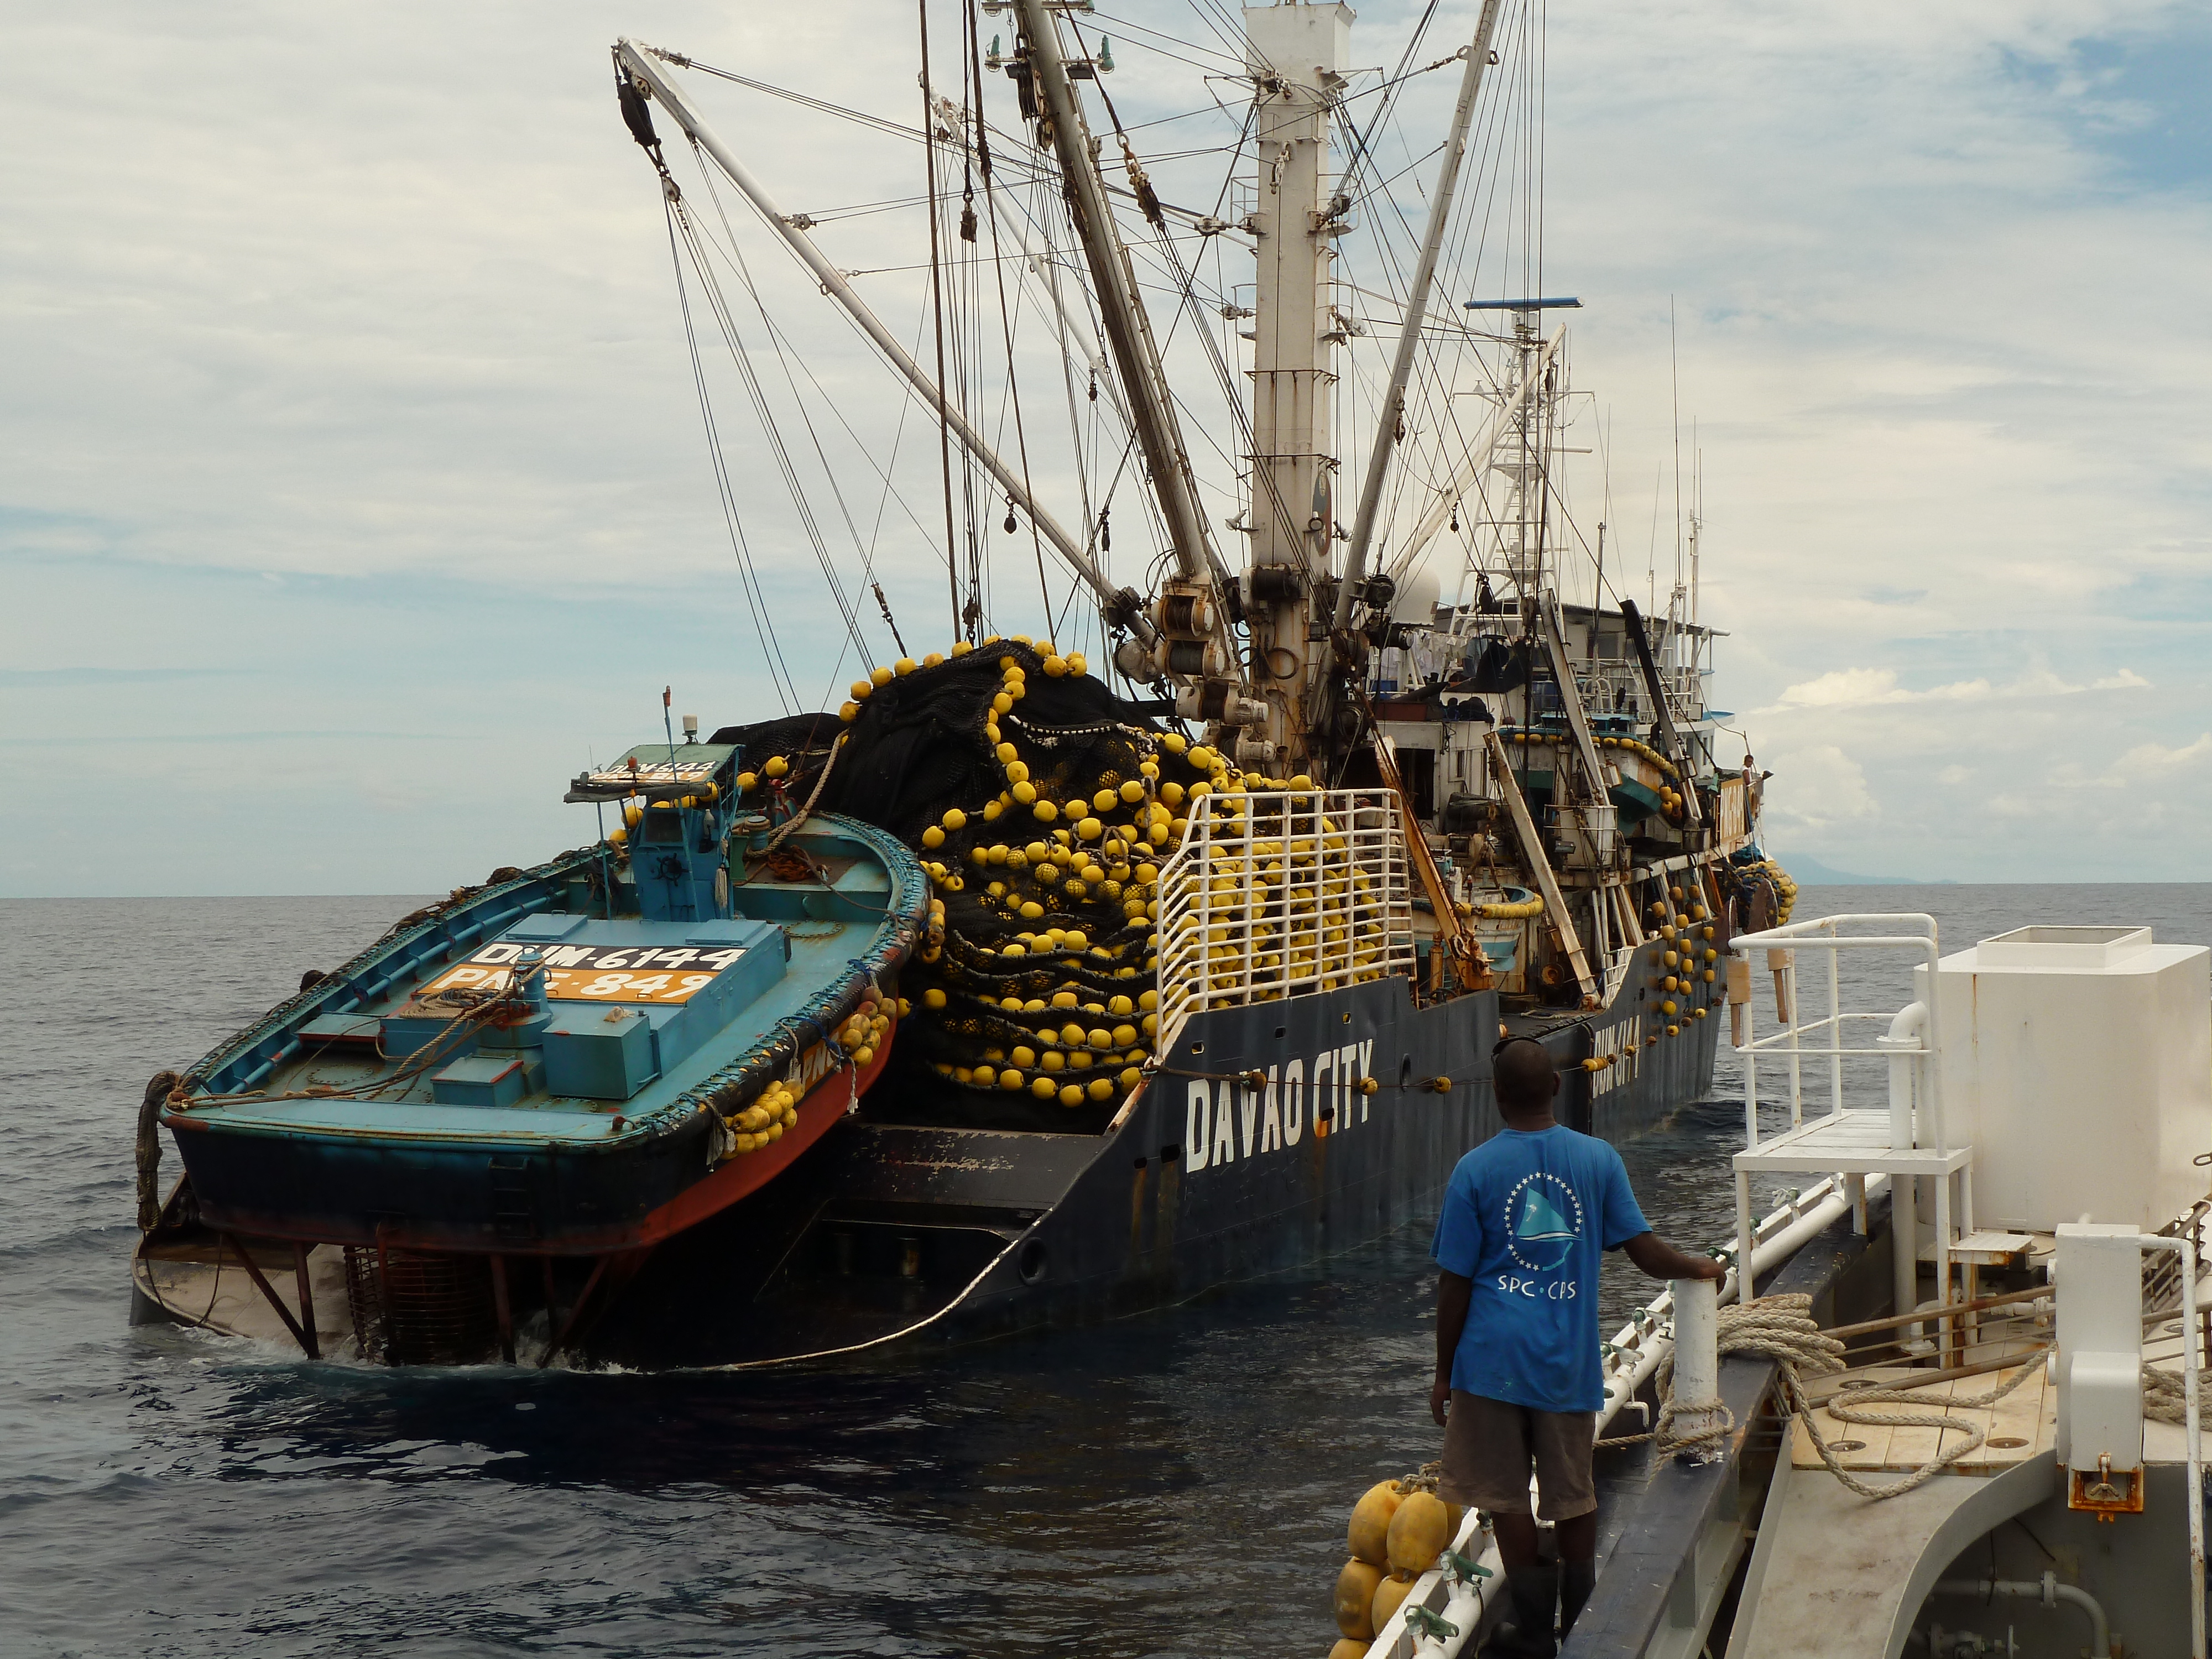 Fisheries sector ‘key economic driver’ in Pacific Islands states